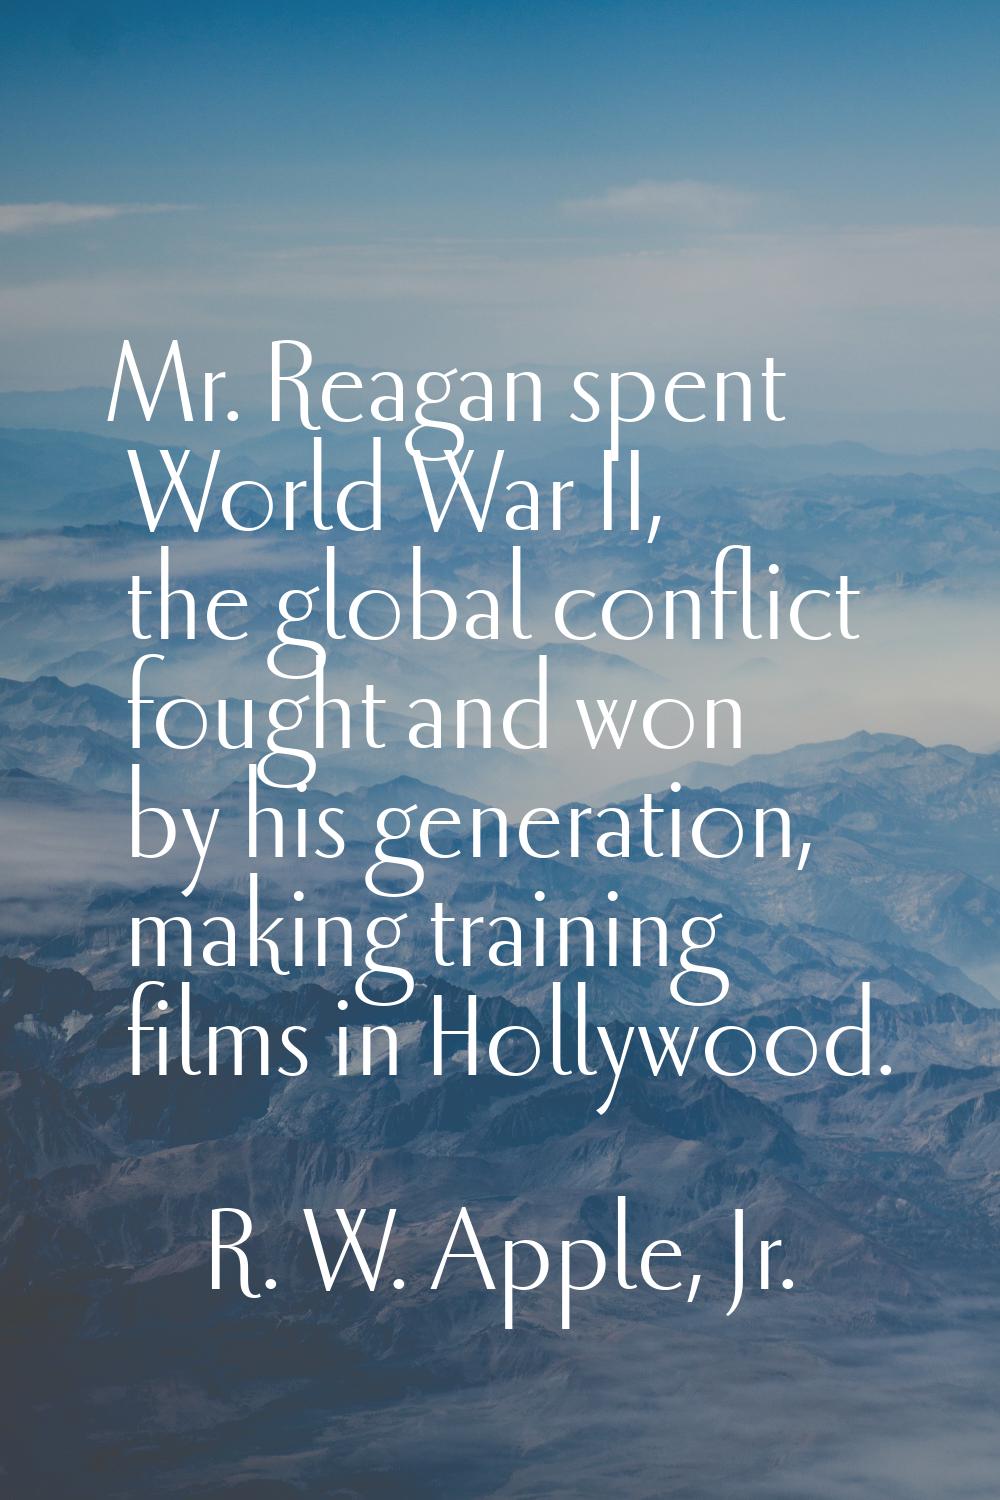 Mr. Reagan spent World War II, the global conflict fought and won by his generation, making trainin